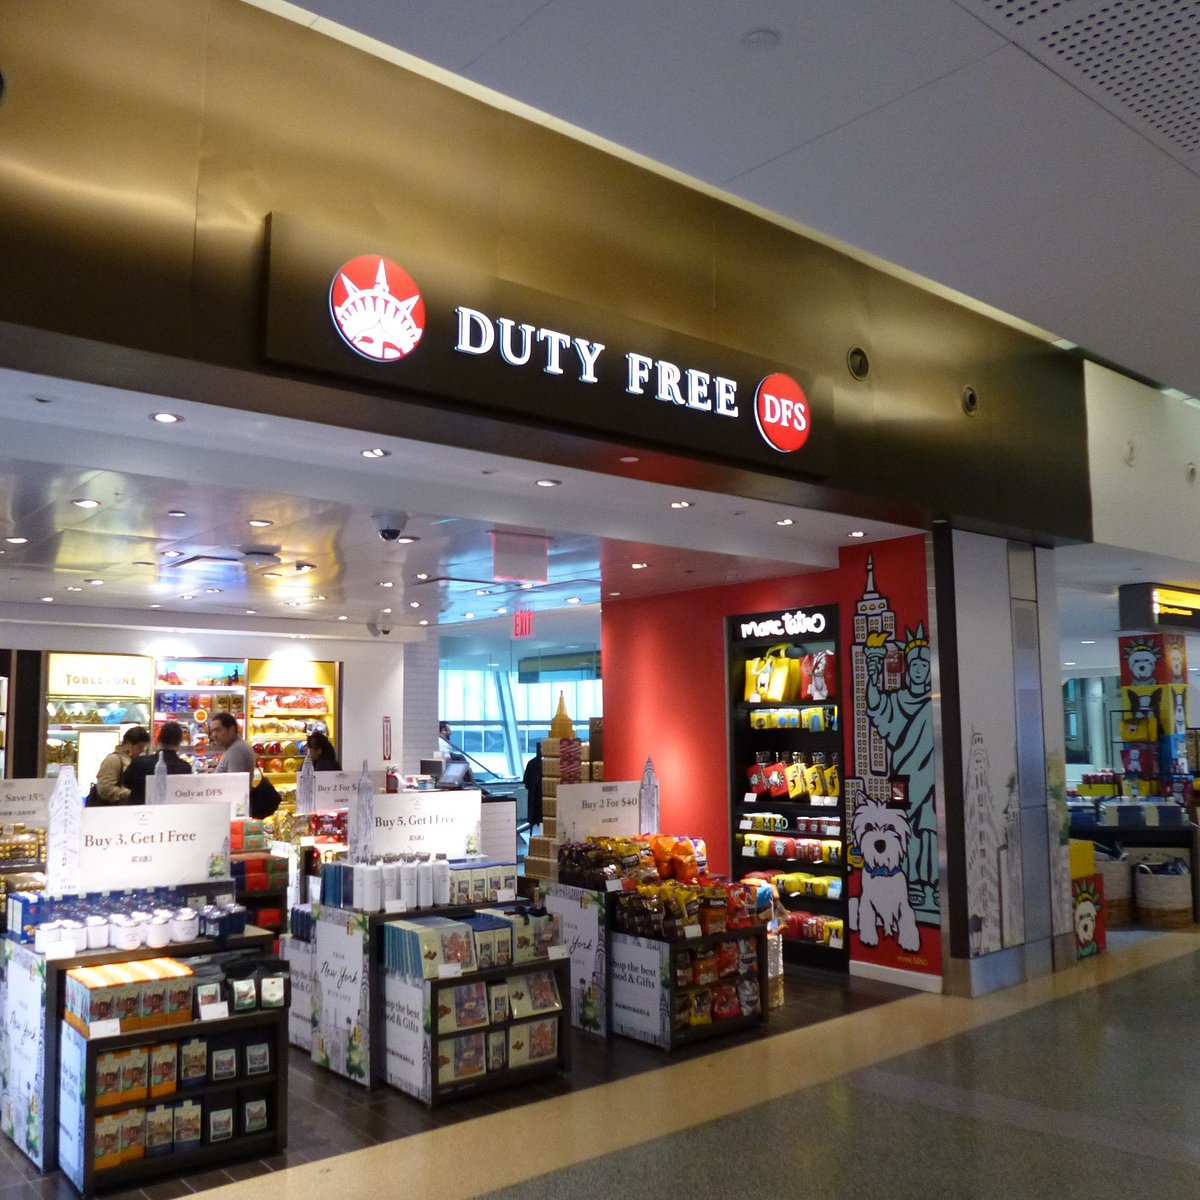 DFS DUTY FREE - 151 Photos & 14 Reviews - 300 Rodgers Blvd